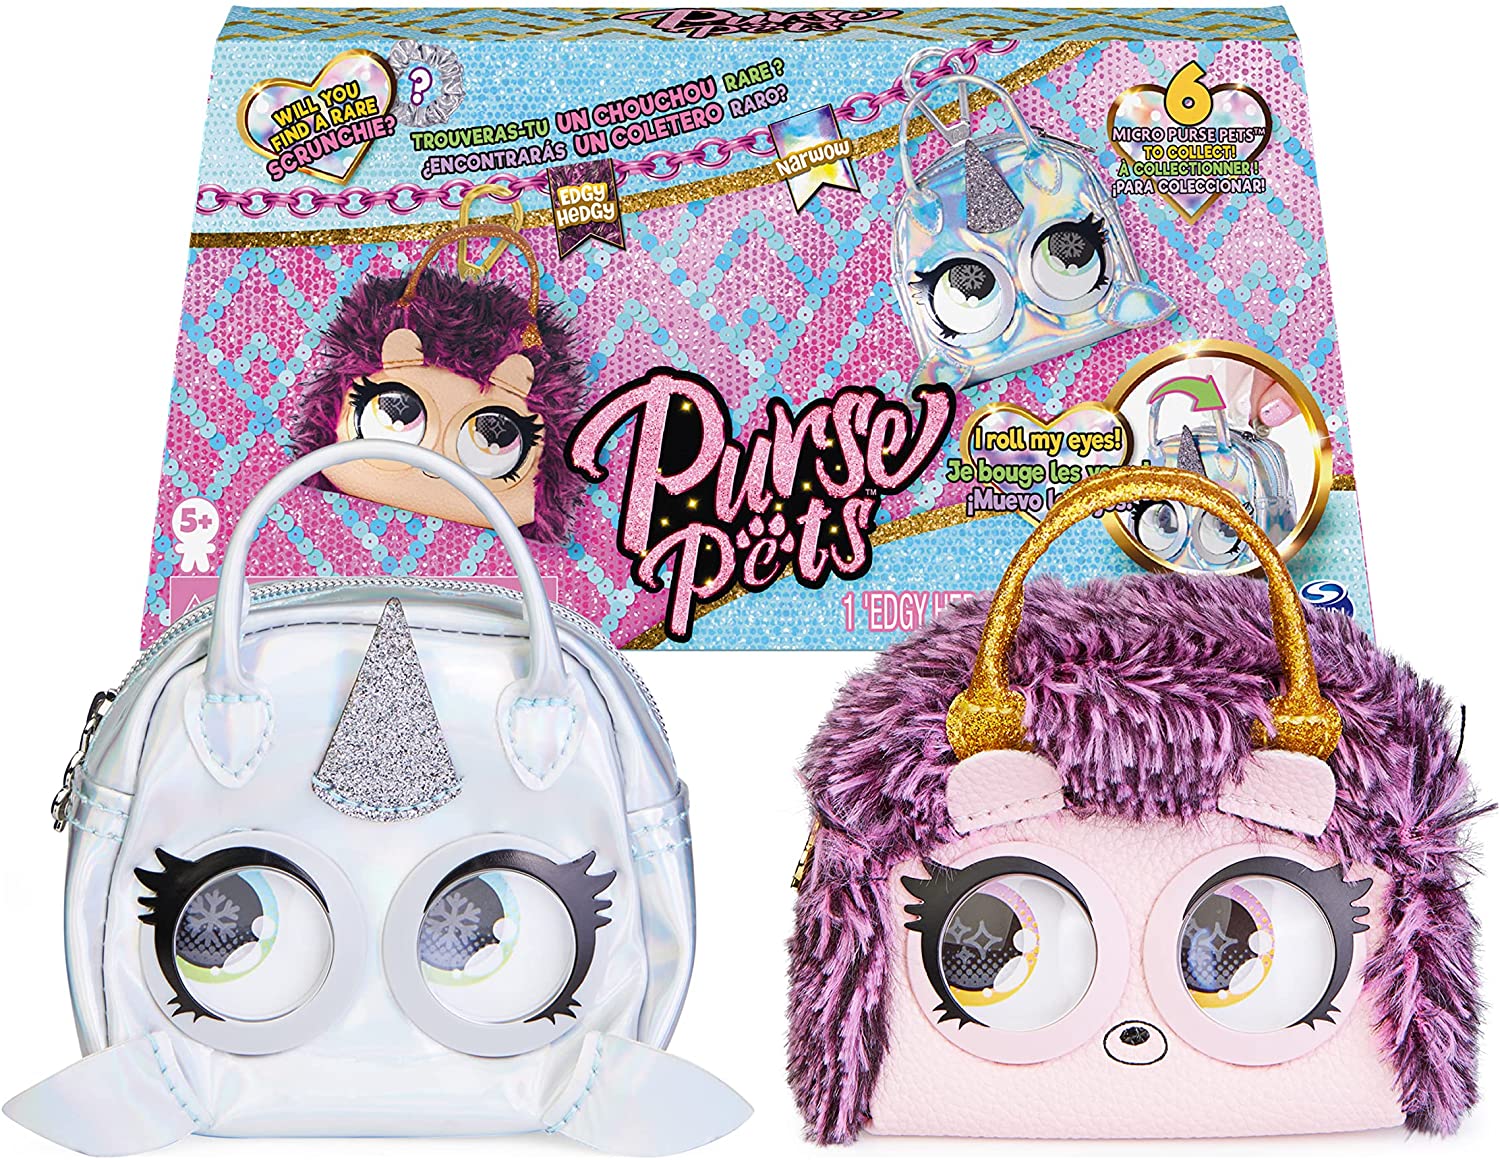 1646573742 youloveit com purse pets micros